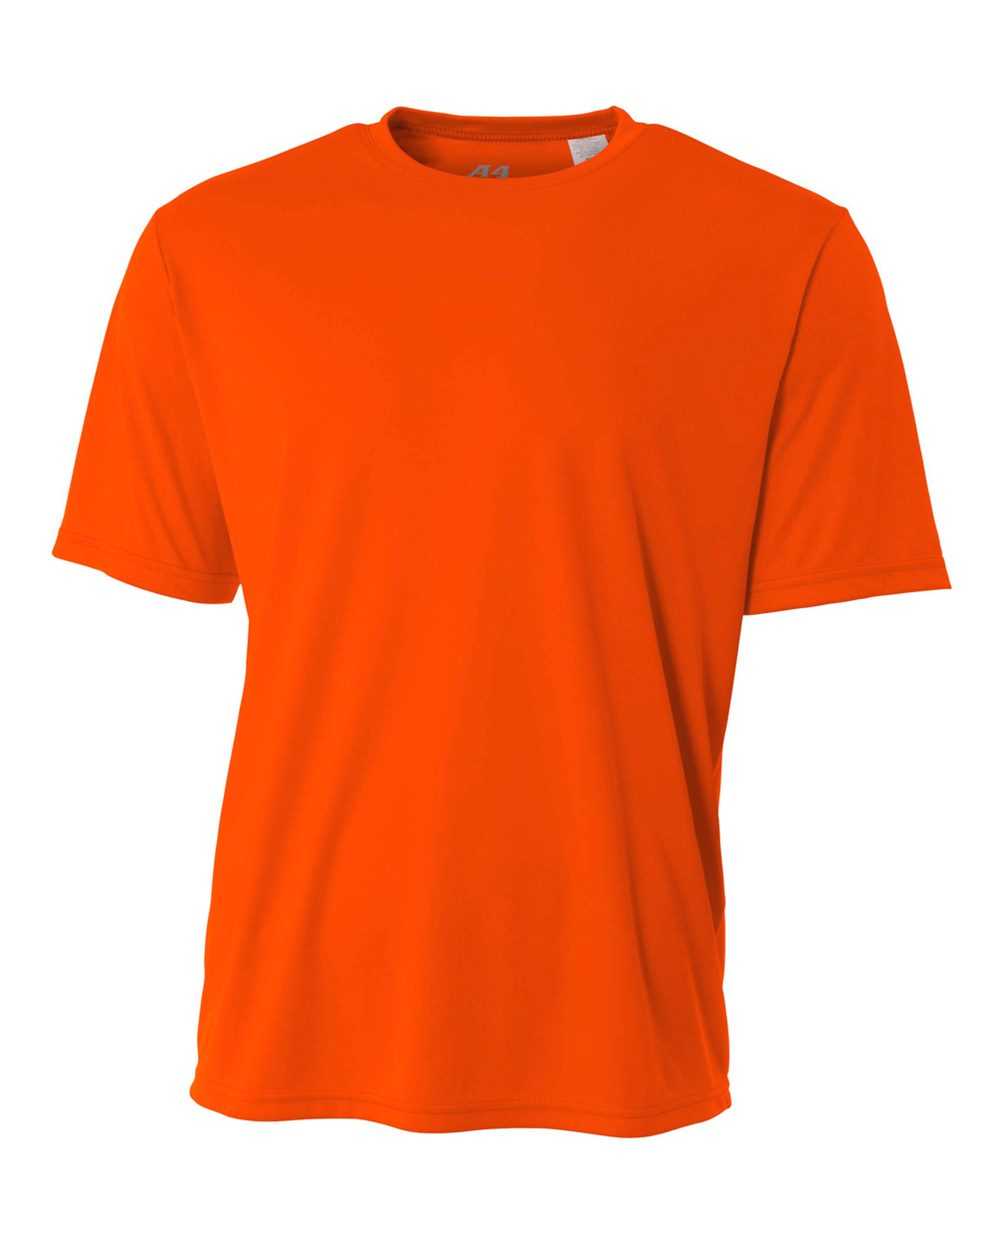 A4 N3142 Cooling Performance Crew - Safety Orange - HIT a Double